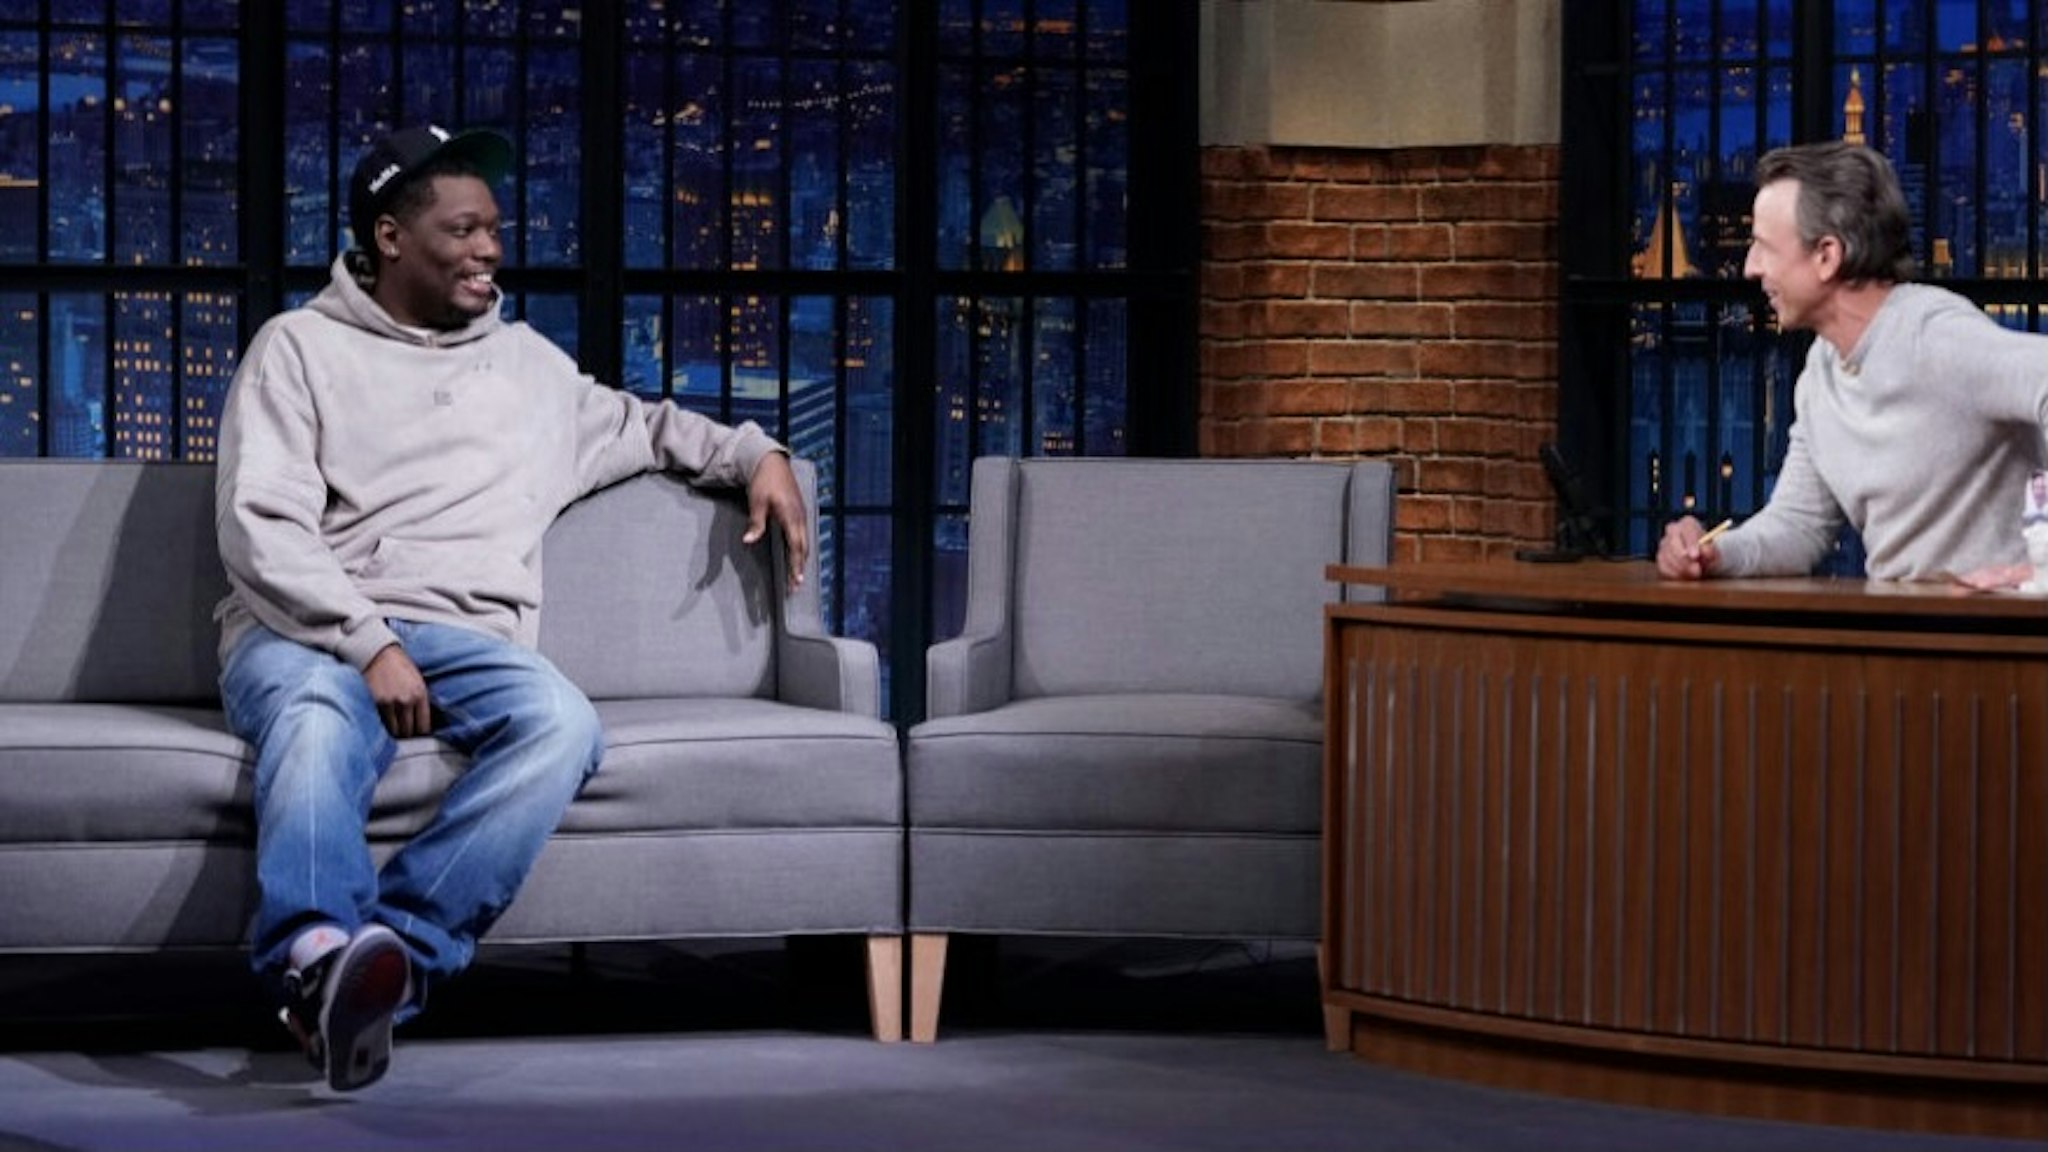 Late Night with Seth Meyers - Season 8 LATE NIGHT WITH SETH MEYERS -- Episode 1139A -- Pictured: (l-r) Comedian Michael Che during an interview with host Seth Meyers on May 3, 2021 -- (Photo by: Lloyd Bishop/NBC/NBCU Photo Bank via Getty Images)